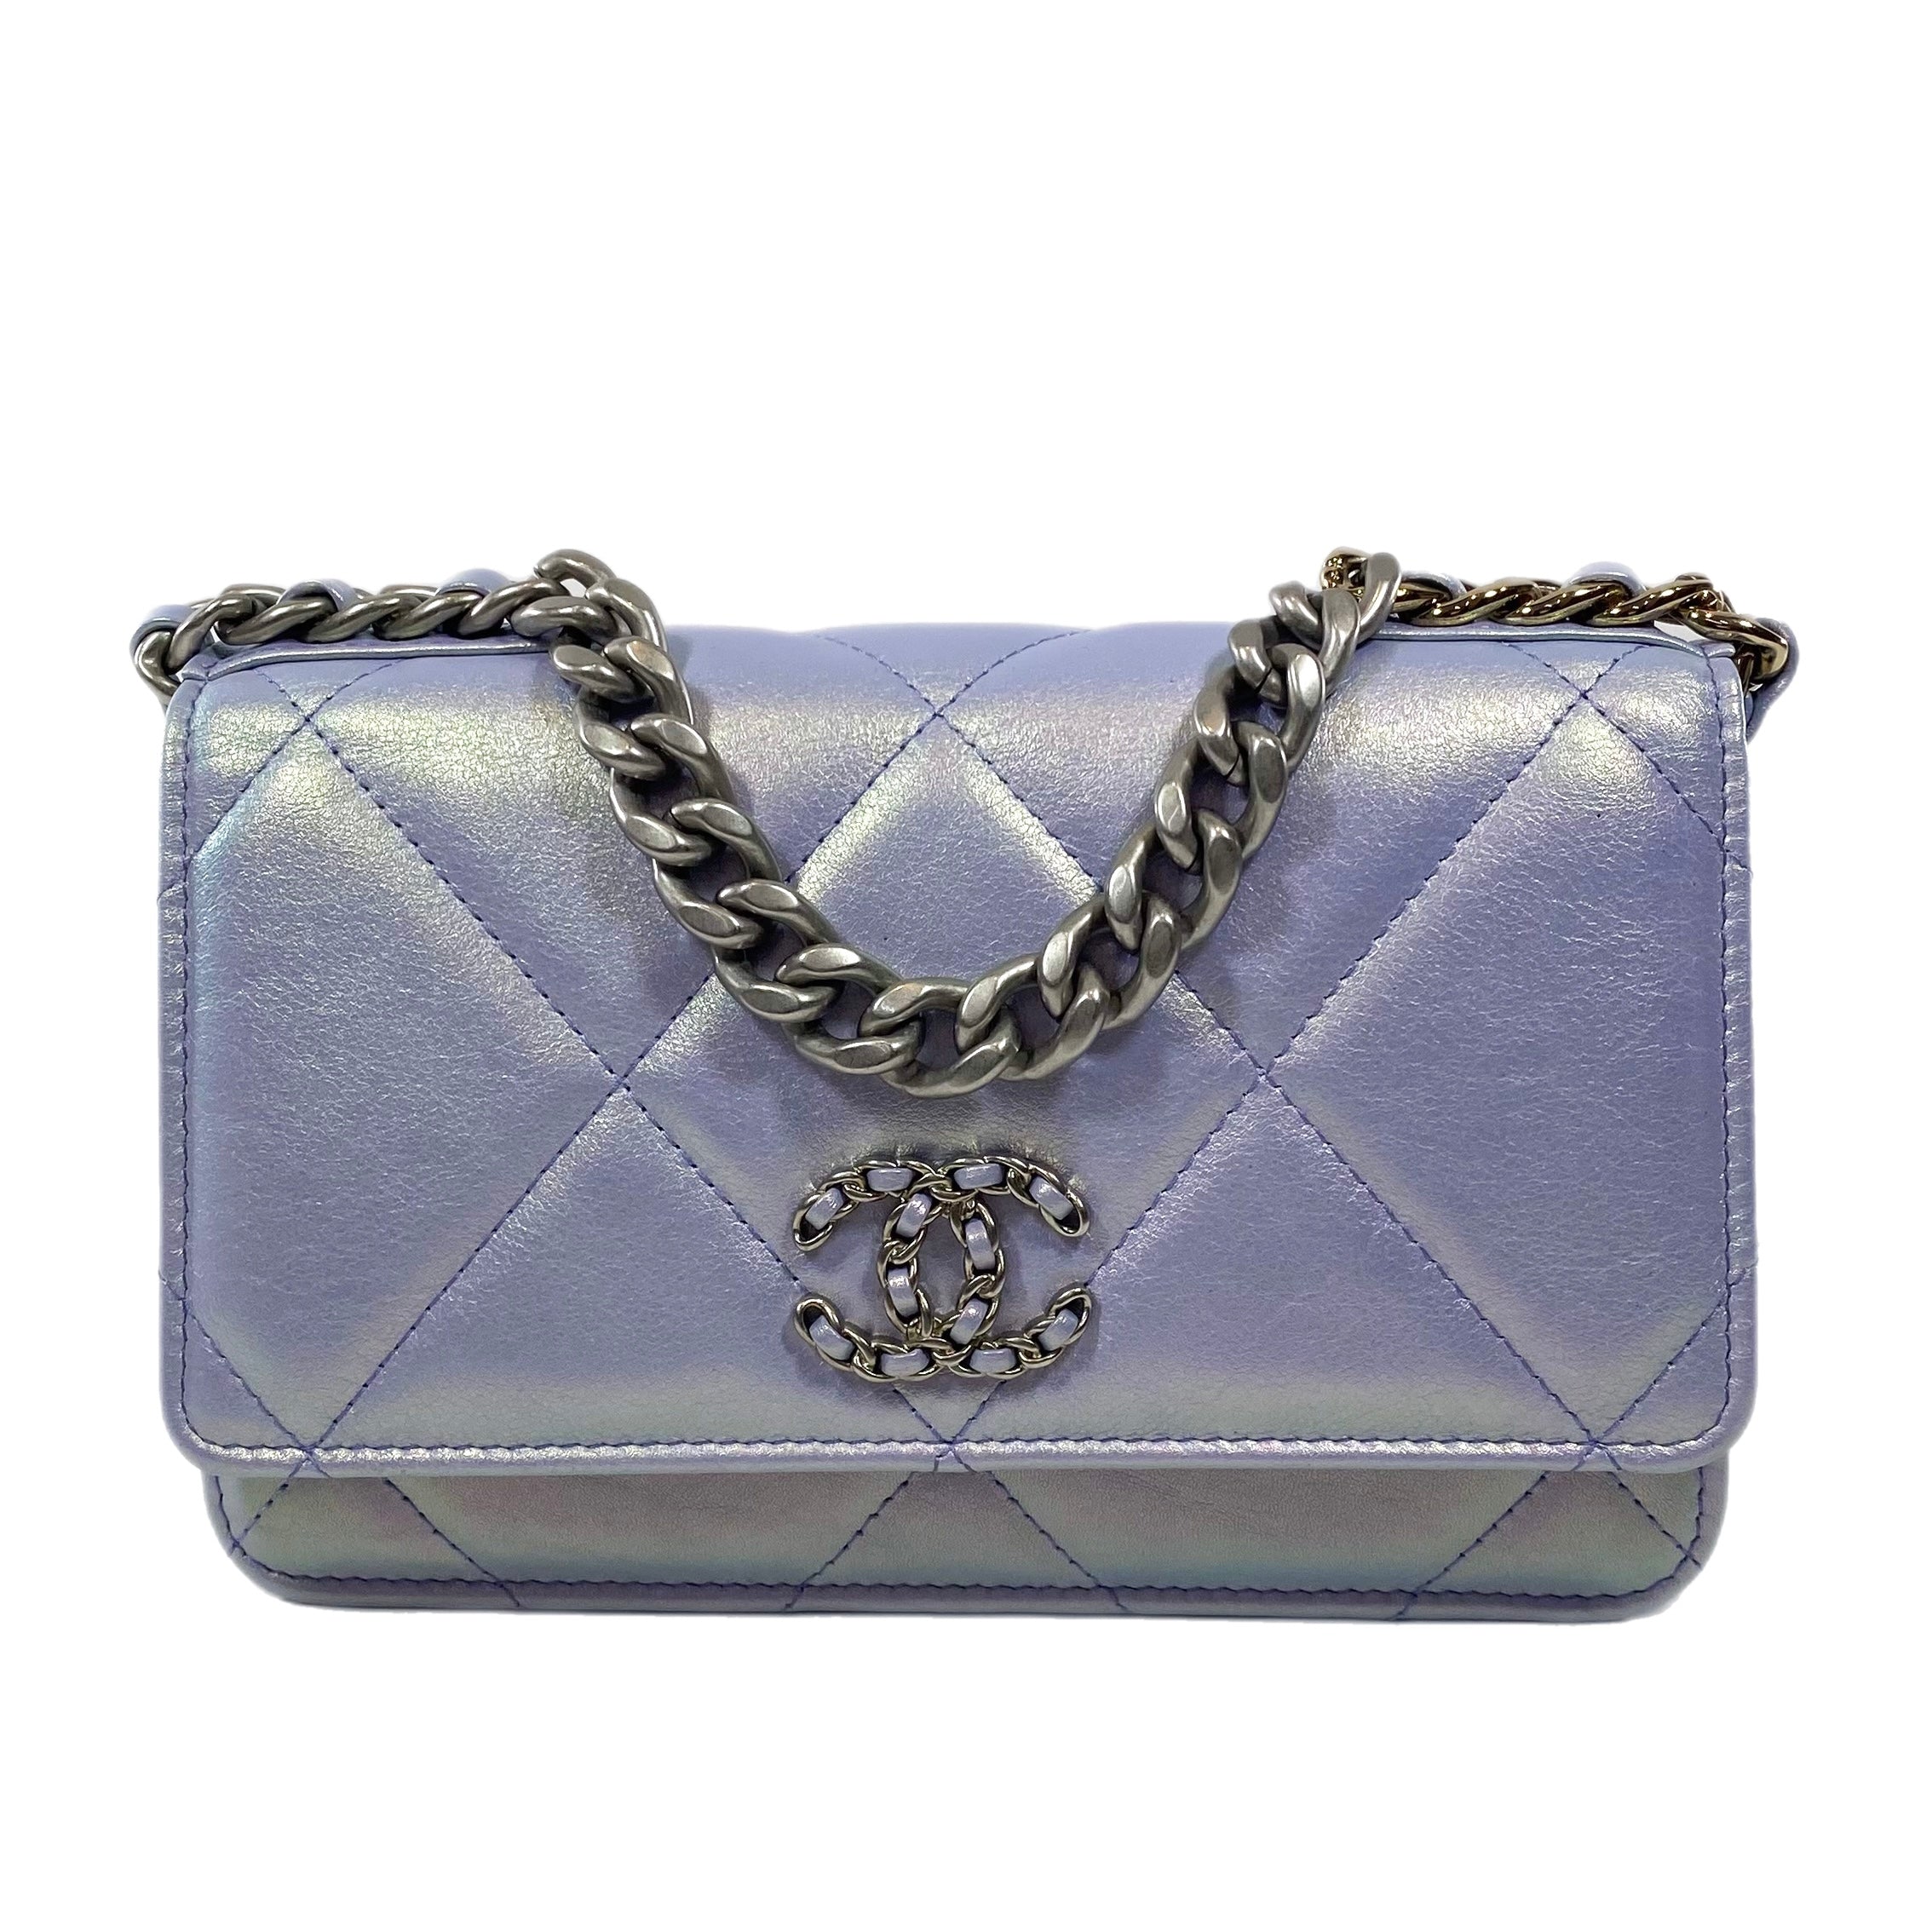 Chanel Iridescent Light Purple Quilted Calfskin Wallet On Chain